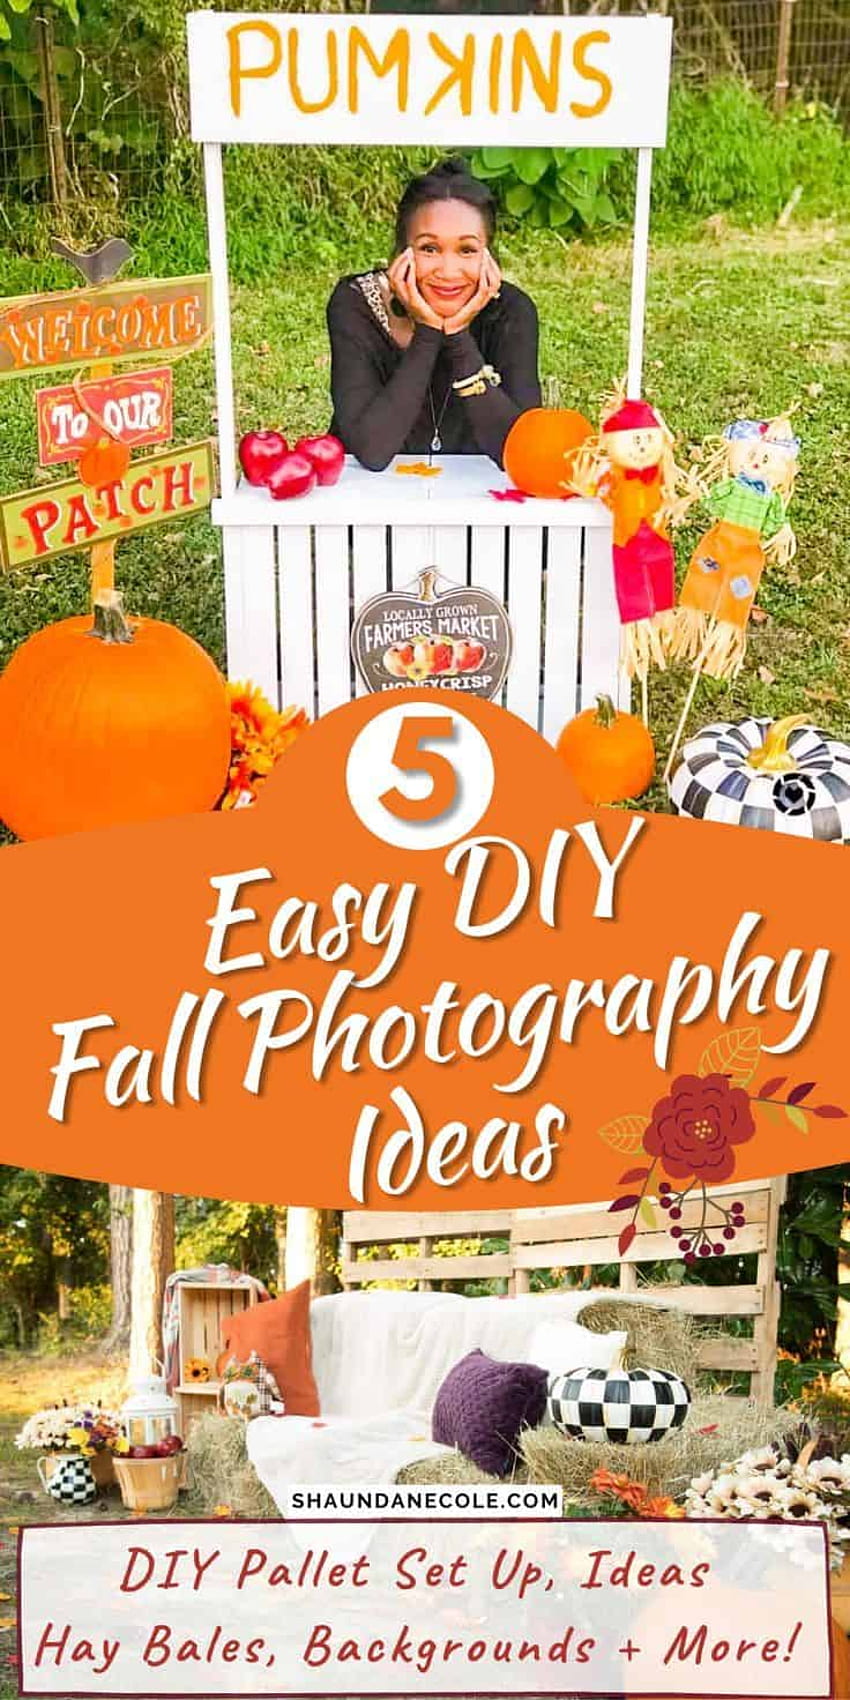 5 Cozy Autumn & Fall graphy Ideas For Instagram Perfect Poses HD phone wallpaper